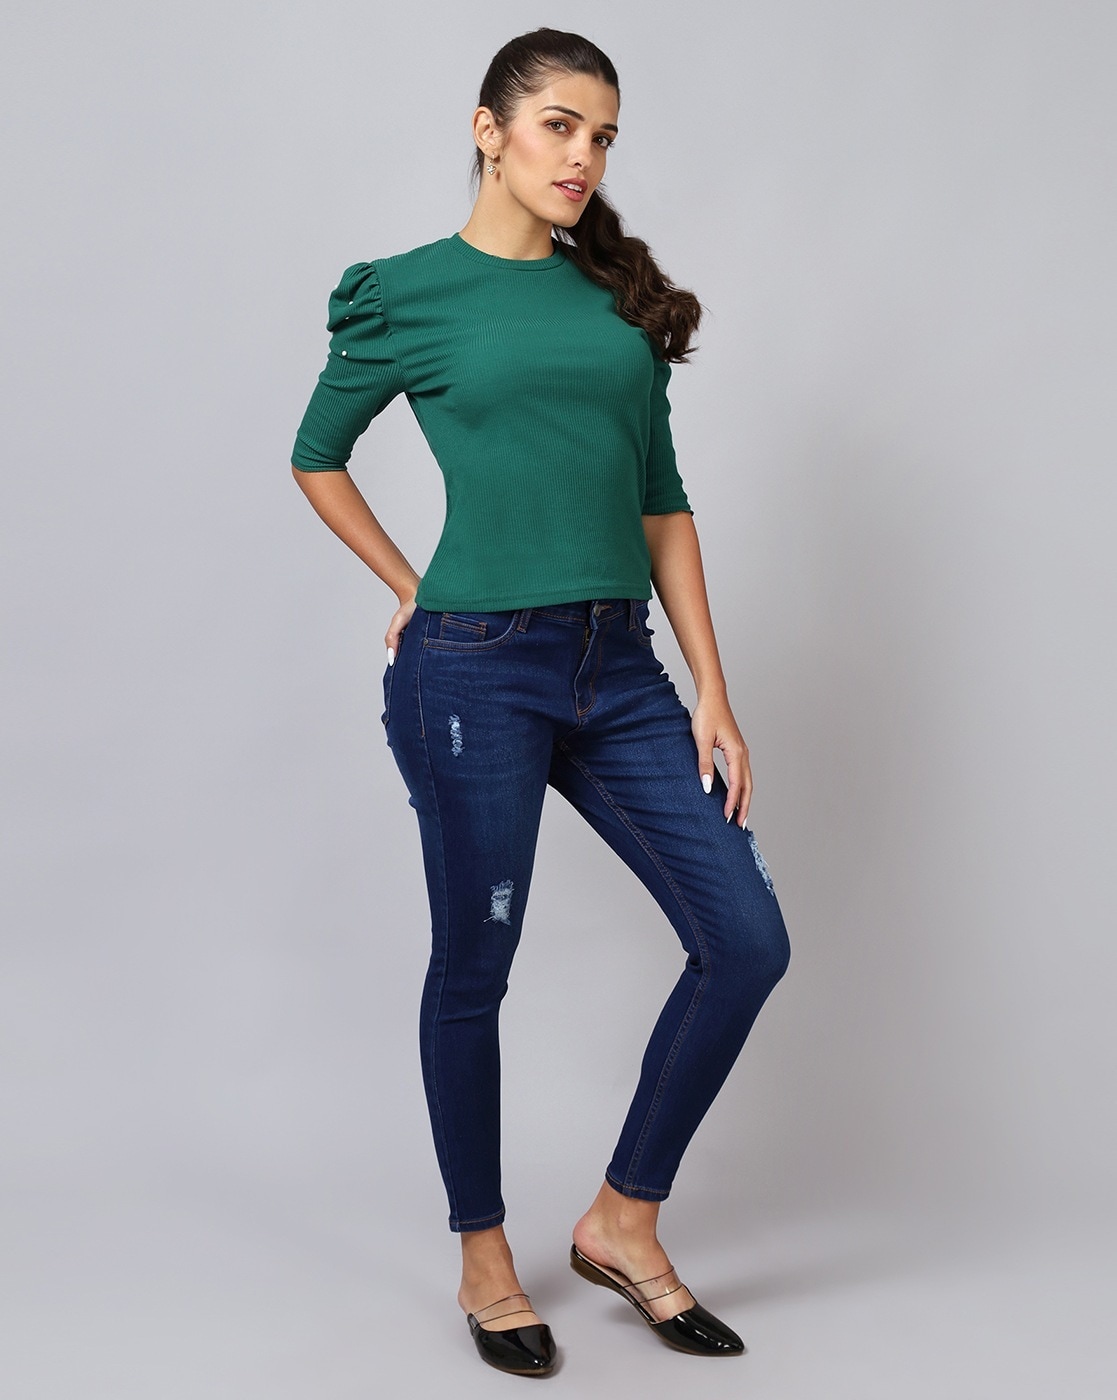 Best Buys On Trendy Tops & Shirts | Women | Pepe Jeans India